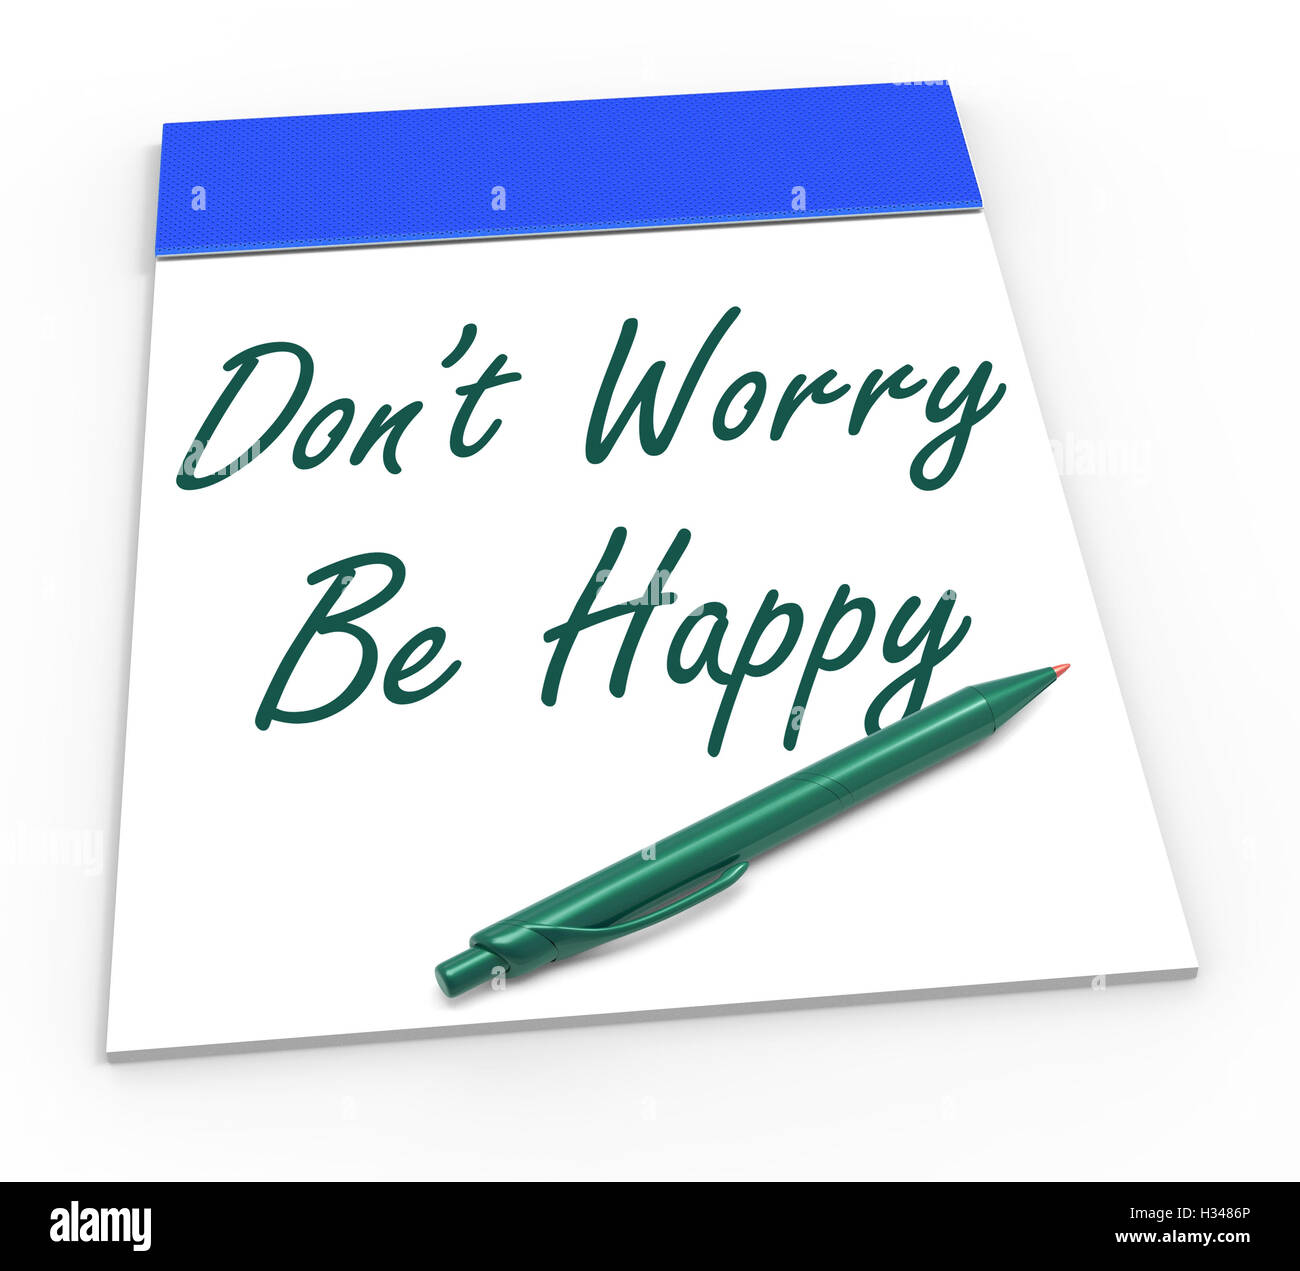 Dont Worry Be Happy Notepad Shows Being Calm And Content Stock Photo